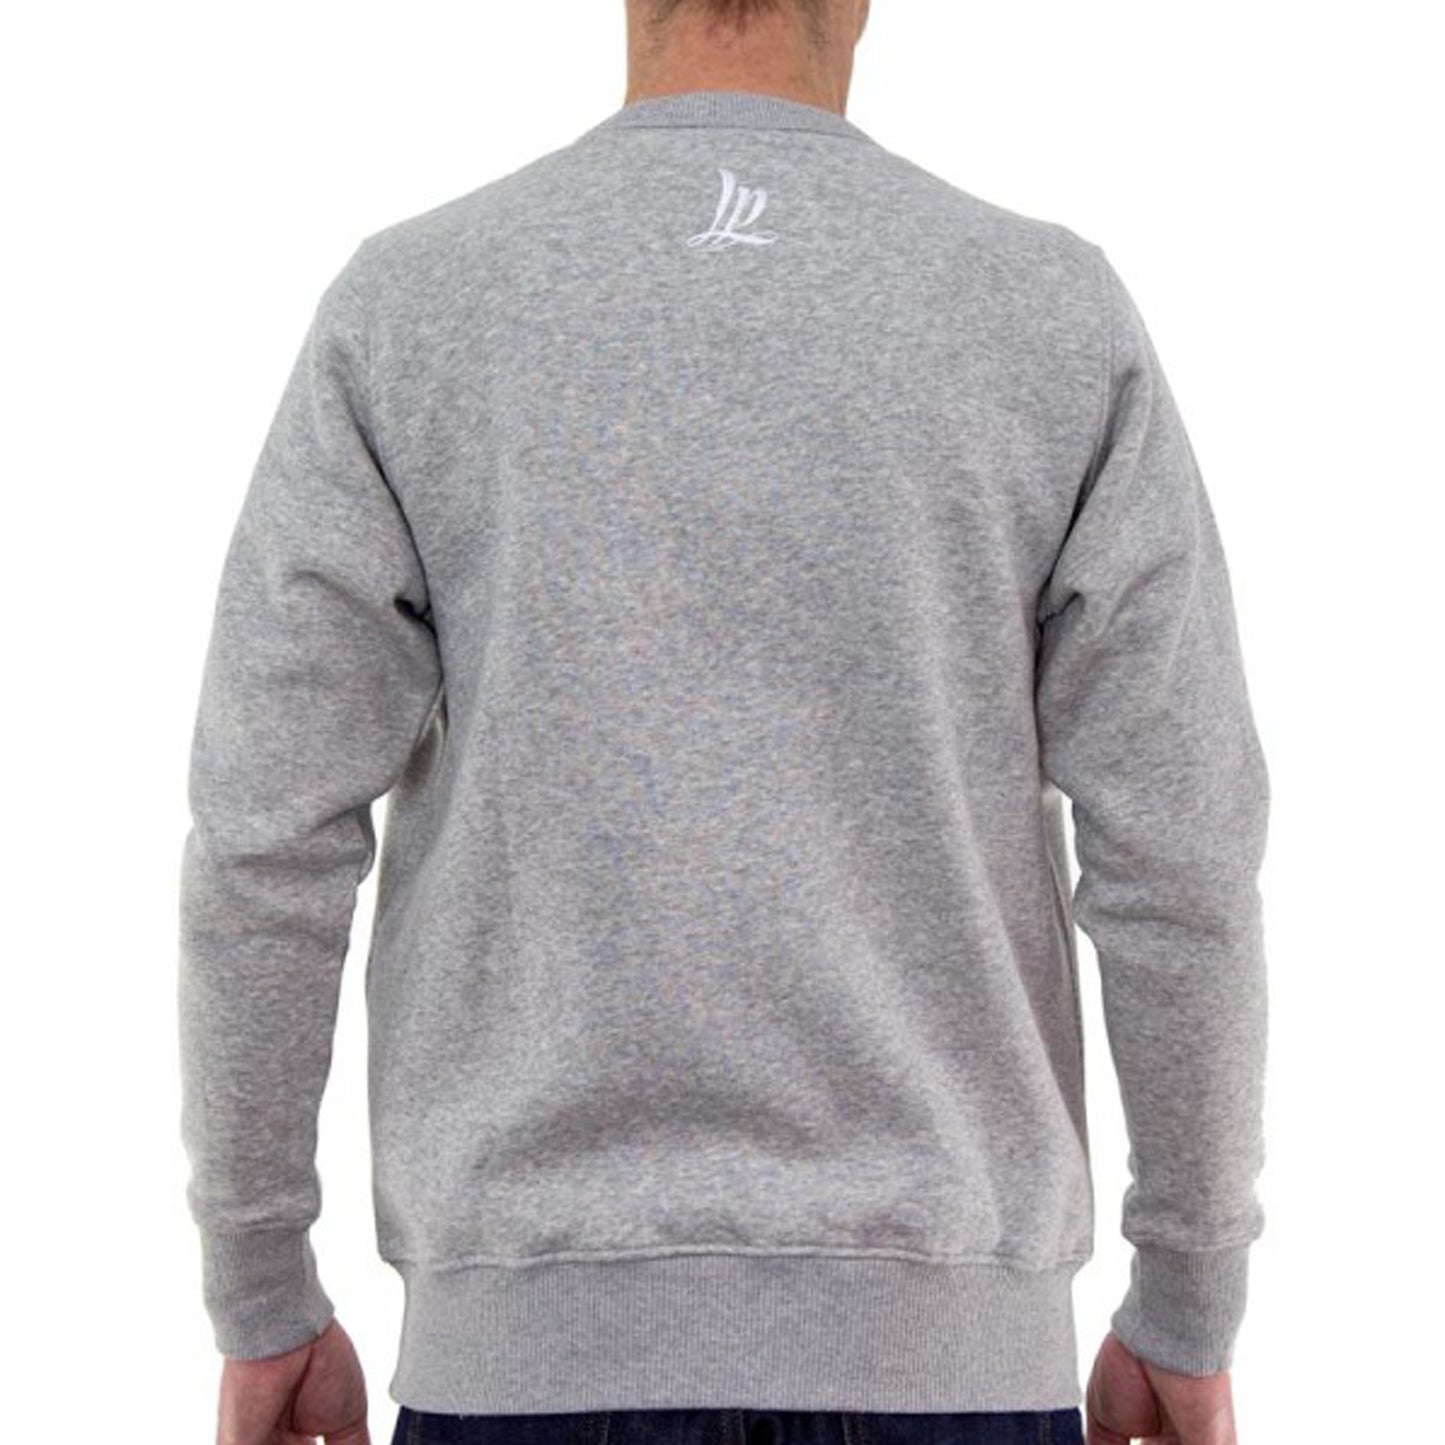 Light grey crew neck sweater with "LP" embroidered on the back in white